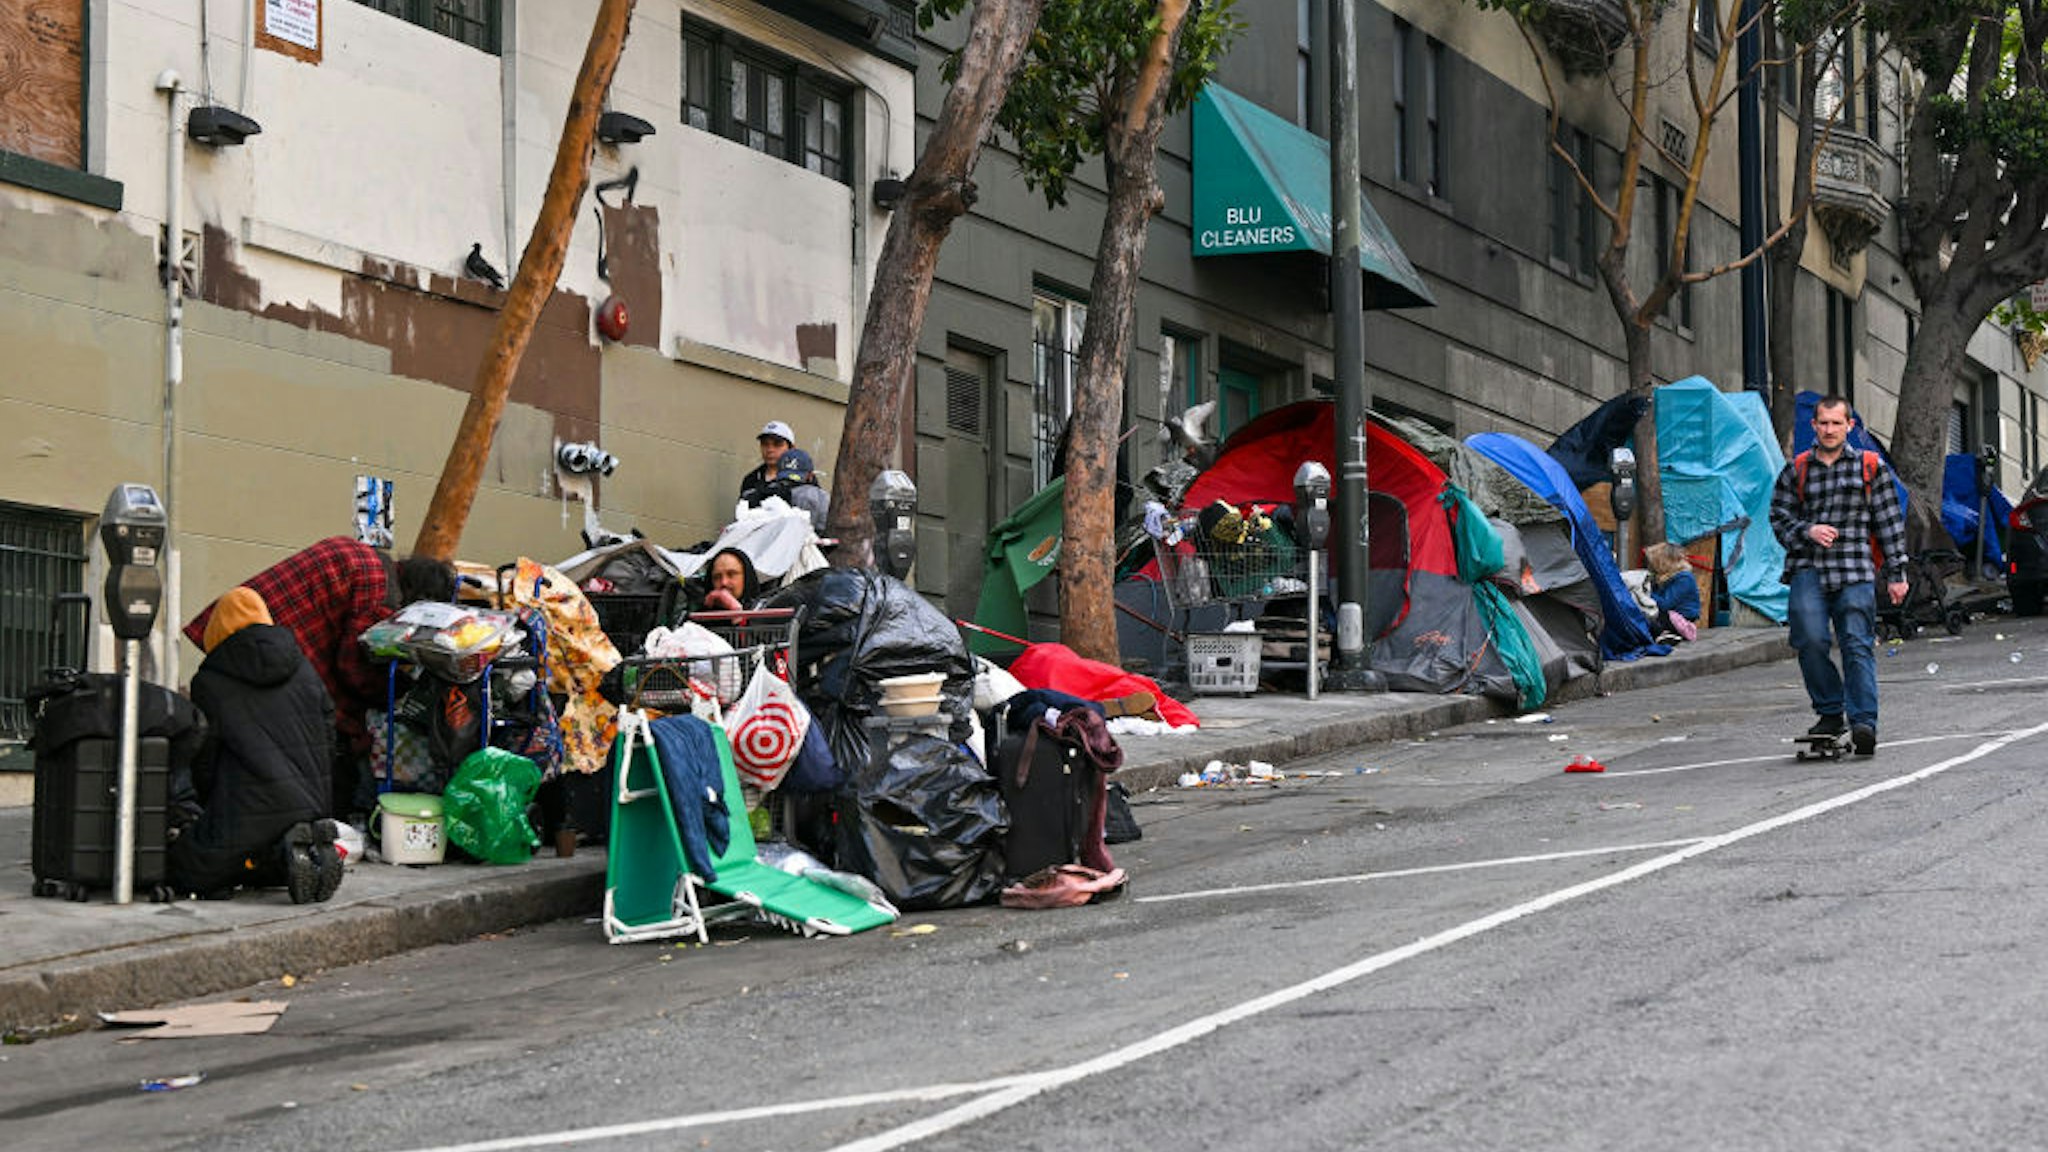 SAN FRANCISCO, CA - JUNE 06: A homeless encampment is seen in Tenderloin District of San Francisco, California, United States on June 6, 2023. (Photo by Tayfun Coskun/Anadolu Agency via Getty Images)